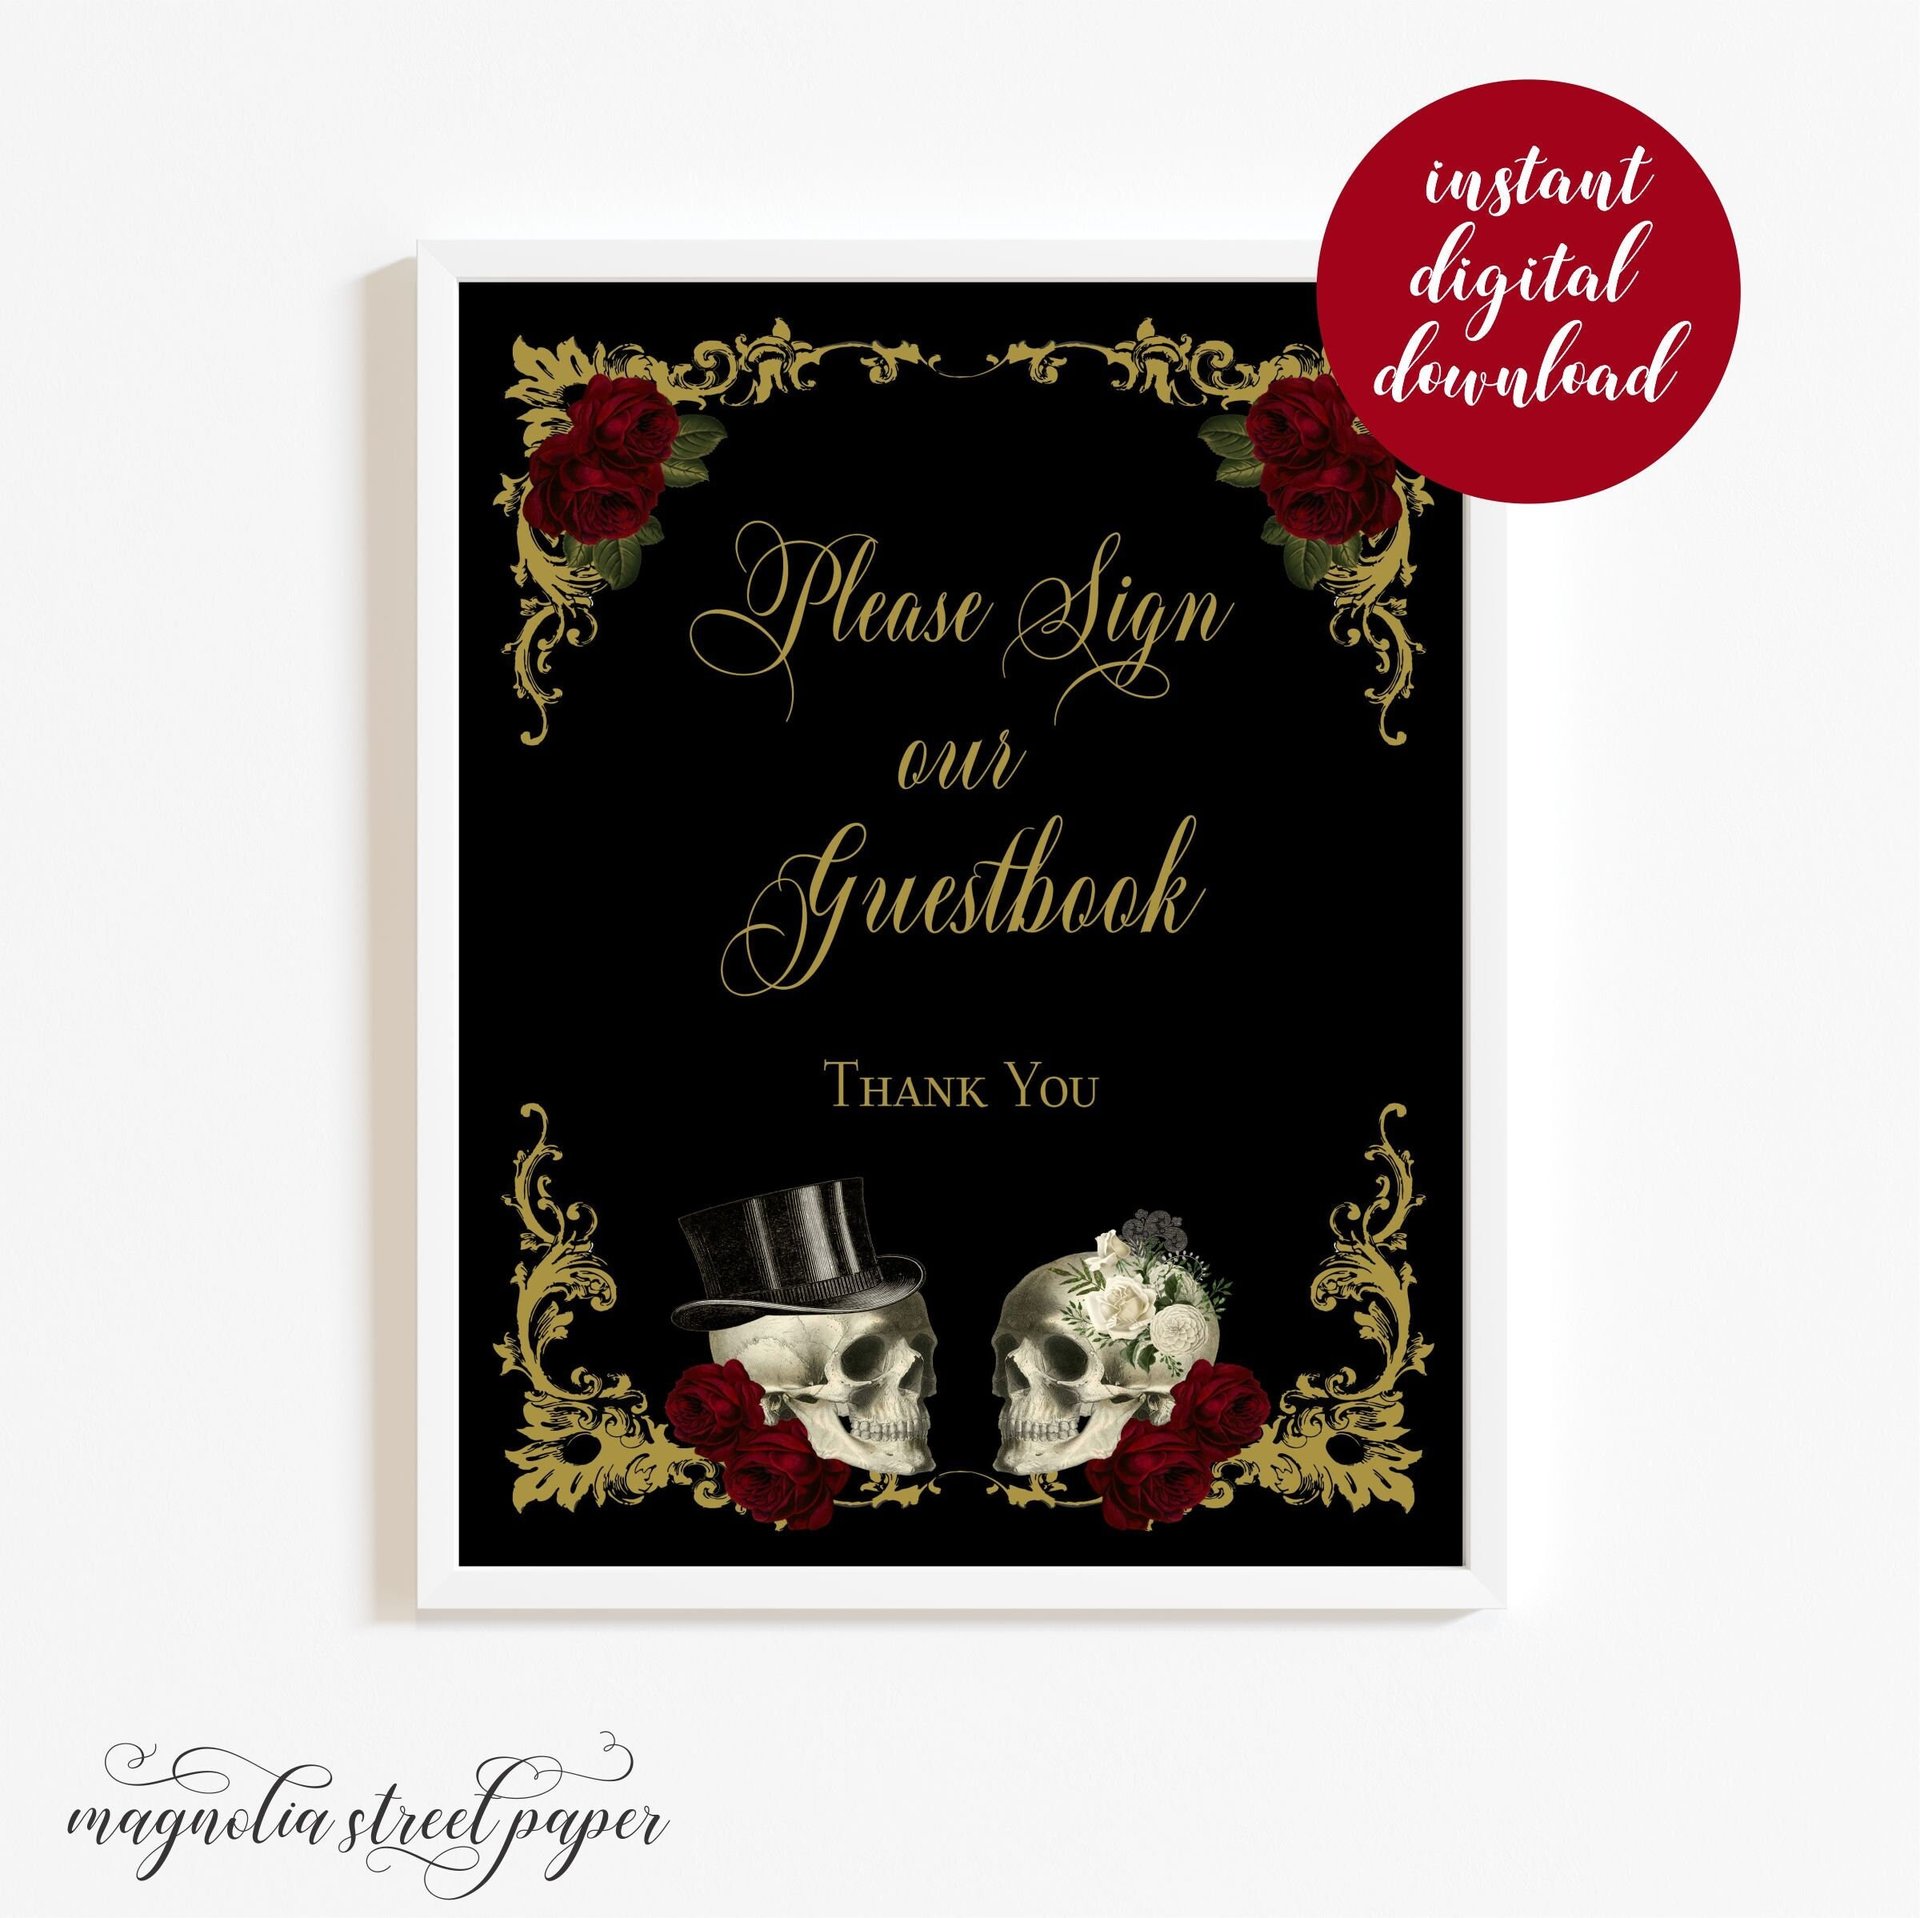 Please Sign Our Guestbook, Printable Halloween Gothic Wedding Sign